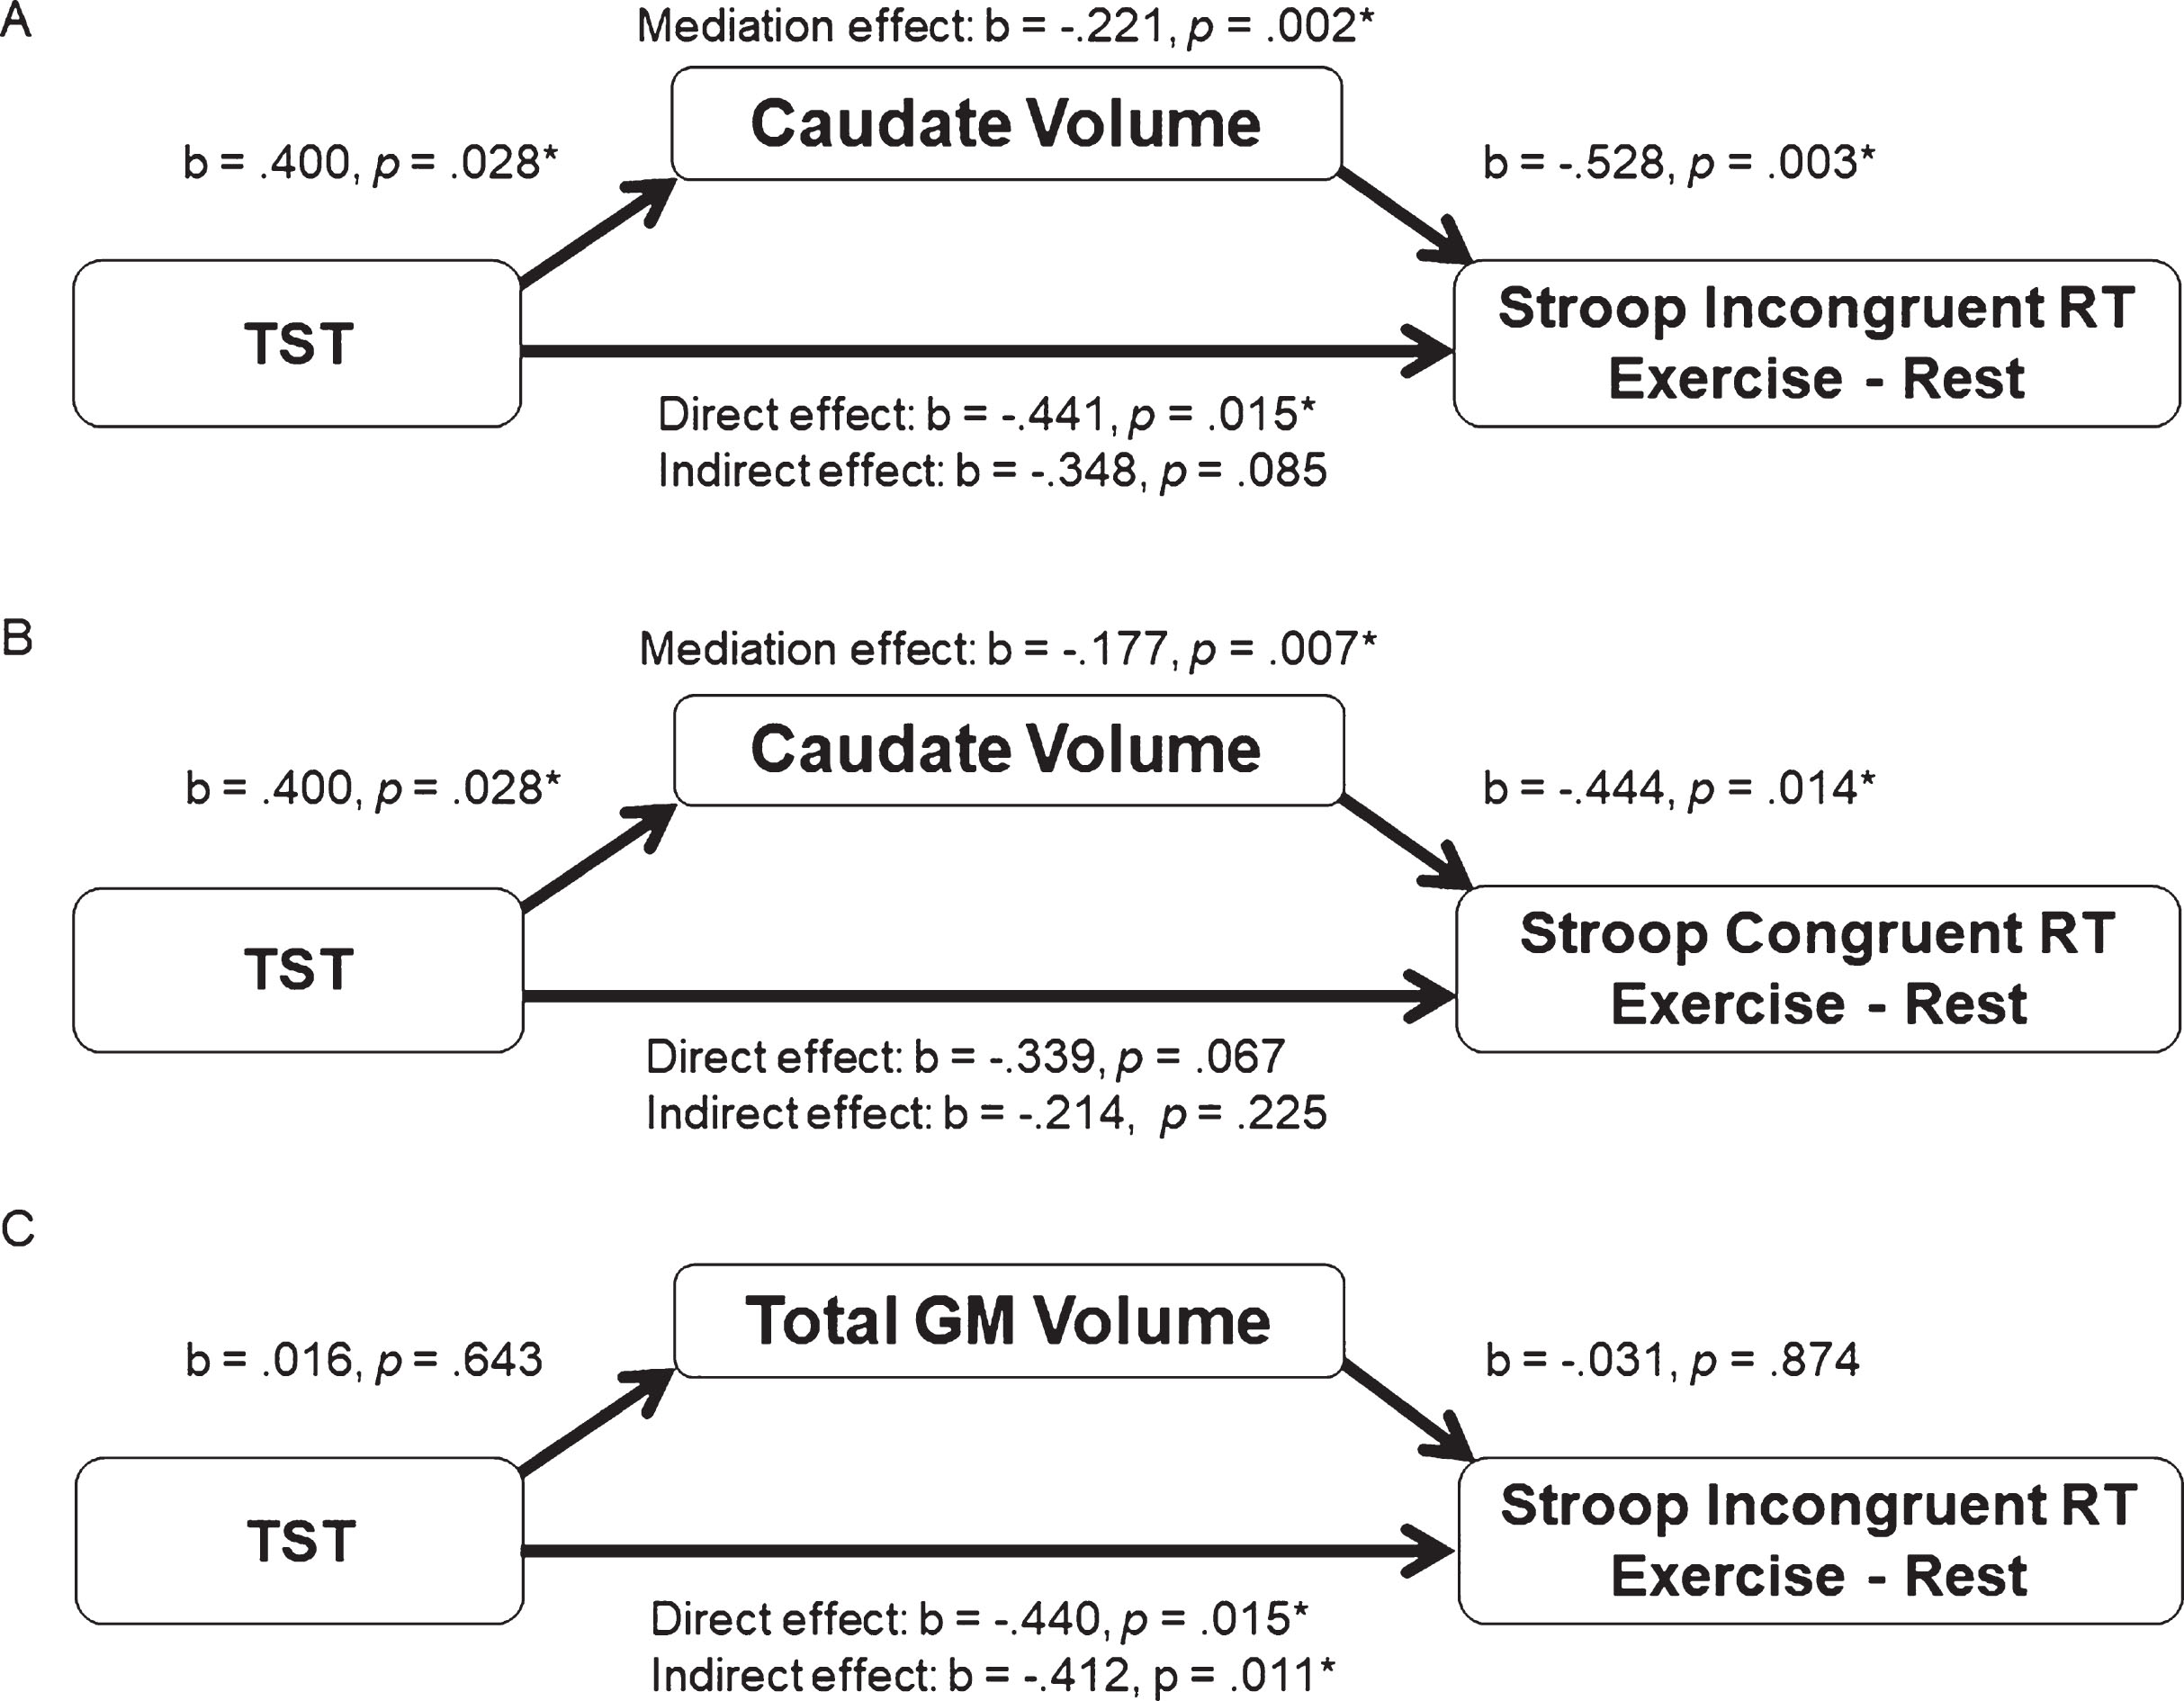 (A) represents the indirect mediating pathway between TST and exercise-altered Stroop incongruent RT through the bilateral caudate volume. Mediation analysis of the relationship between TST and exercise-altered Stroop congruent RT with the bilateral caudate volume as a mediator is presented in (B). Mediation analysis of the relationship between TST and exercise-altered Stroop incongruent RT with the total gray matter as a mediator is illustrated in (C).